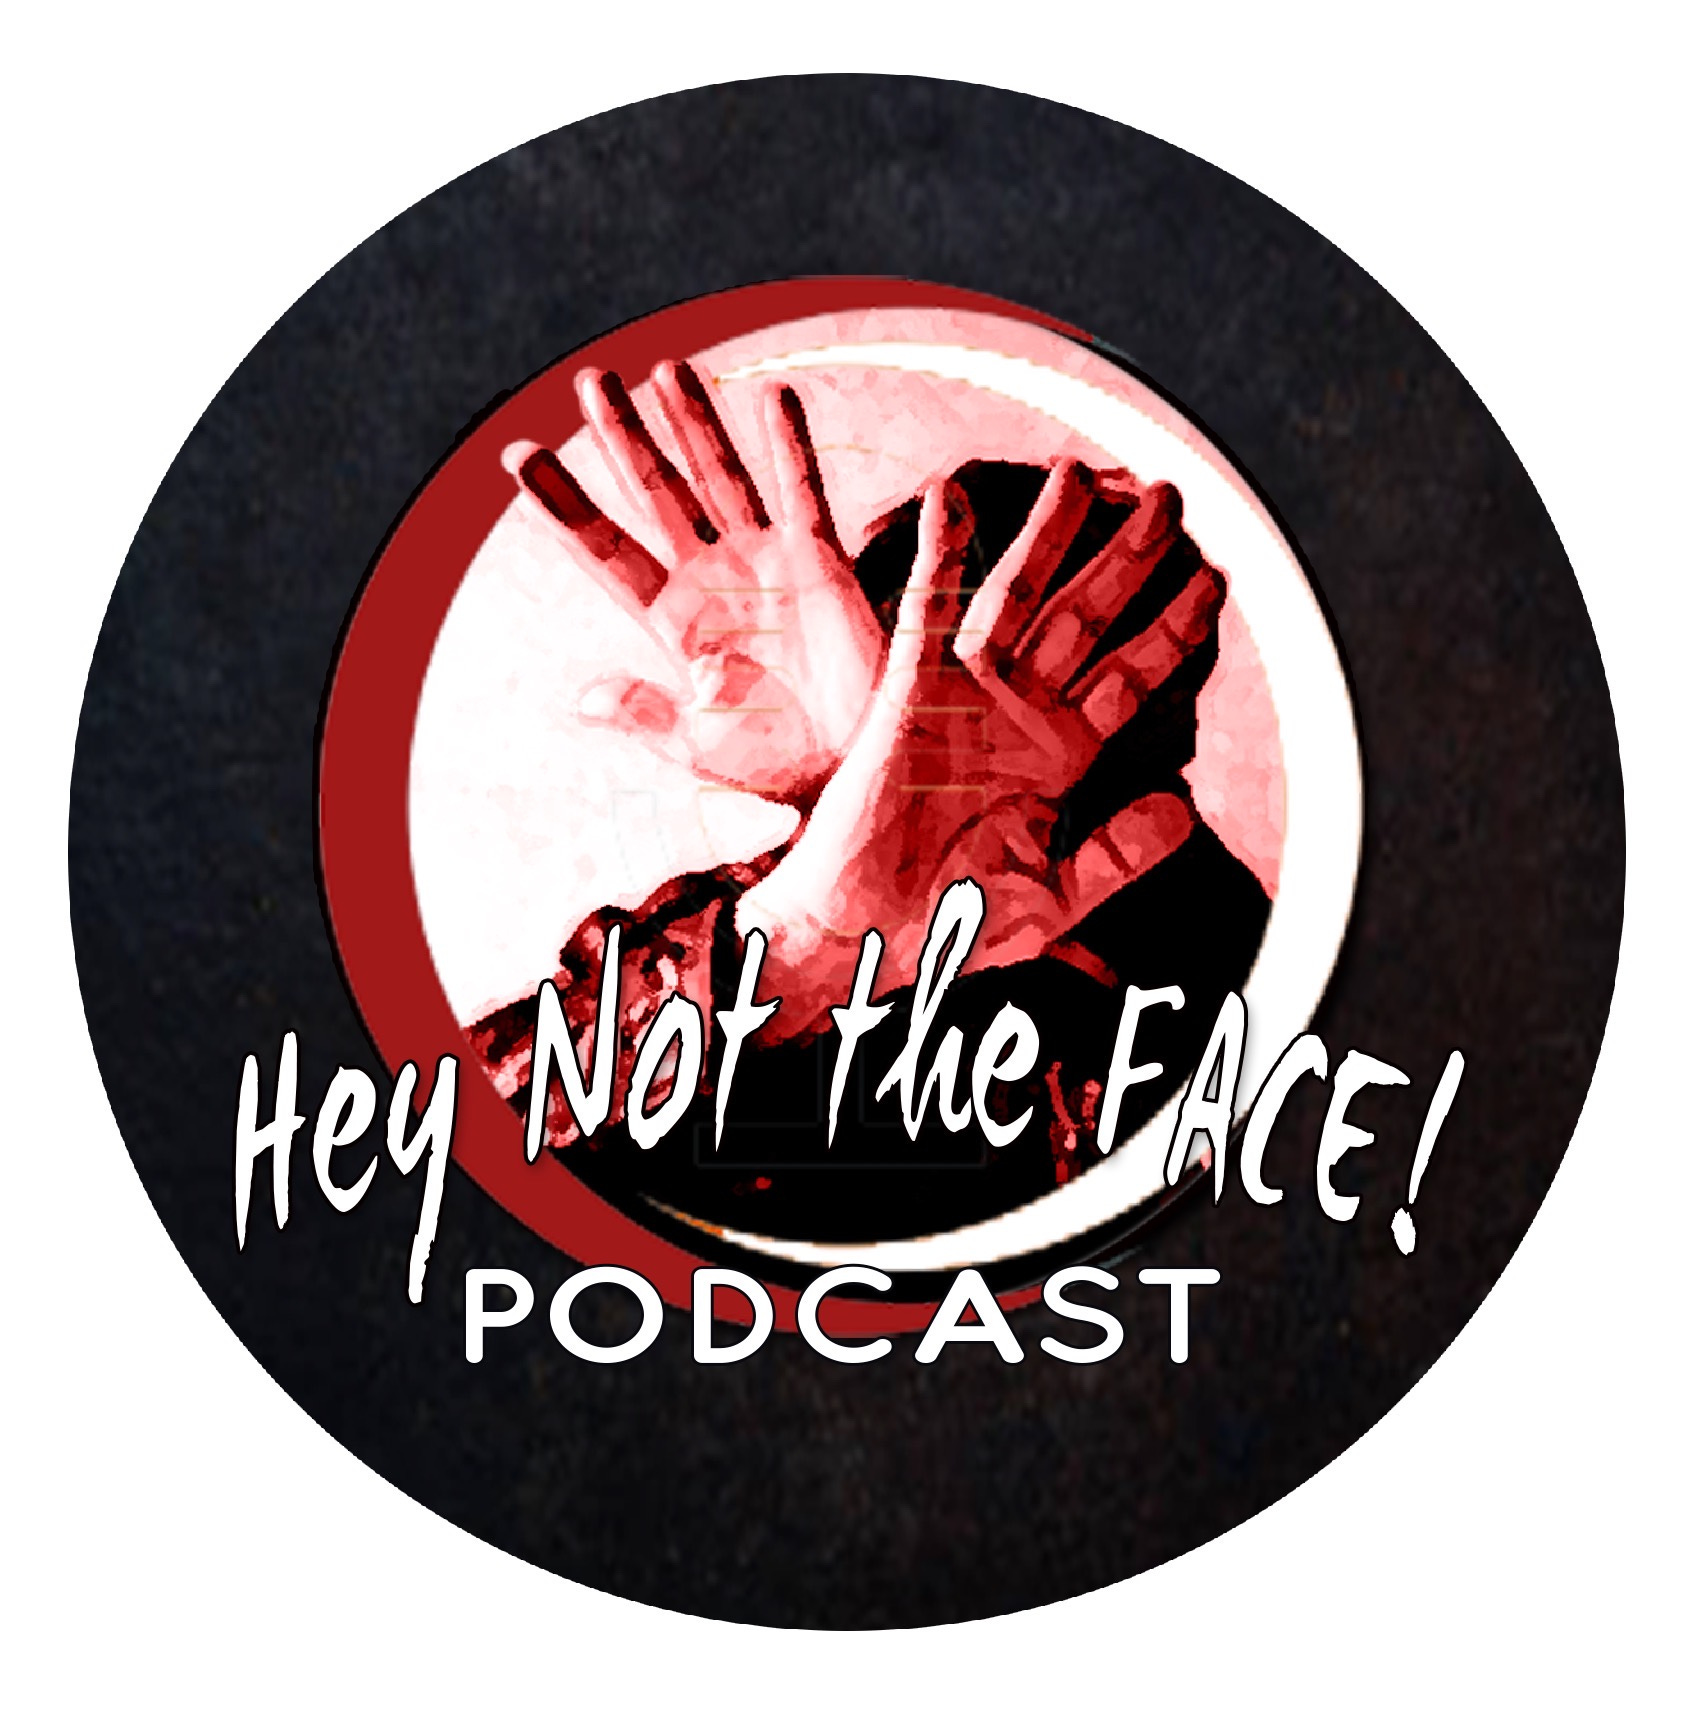 Artwork for Hey Not The Face!